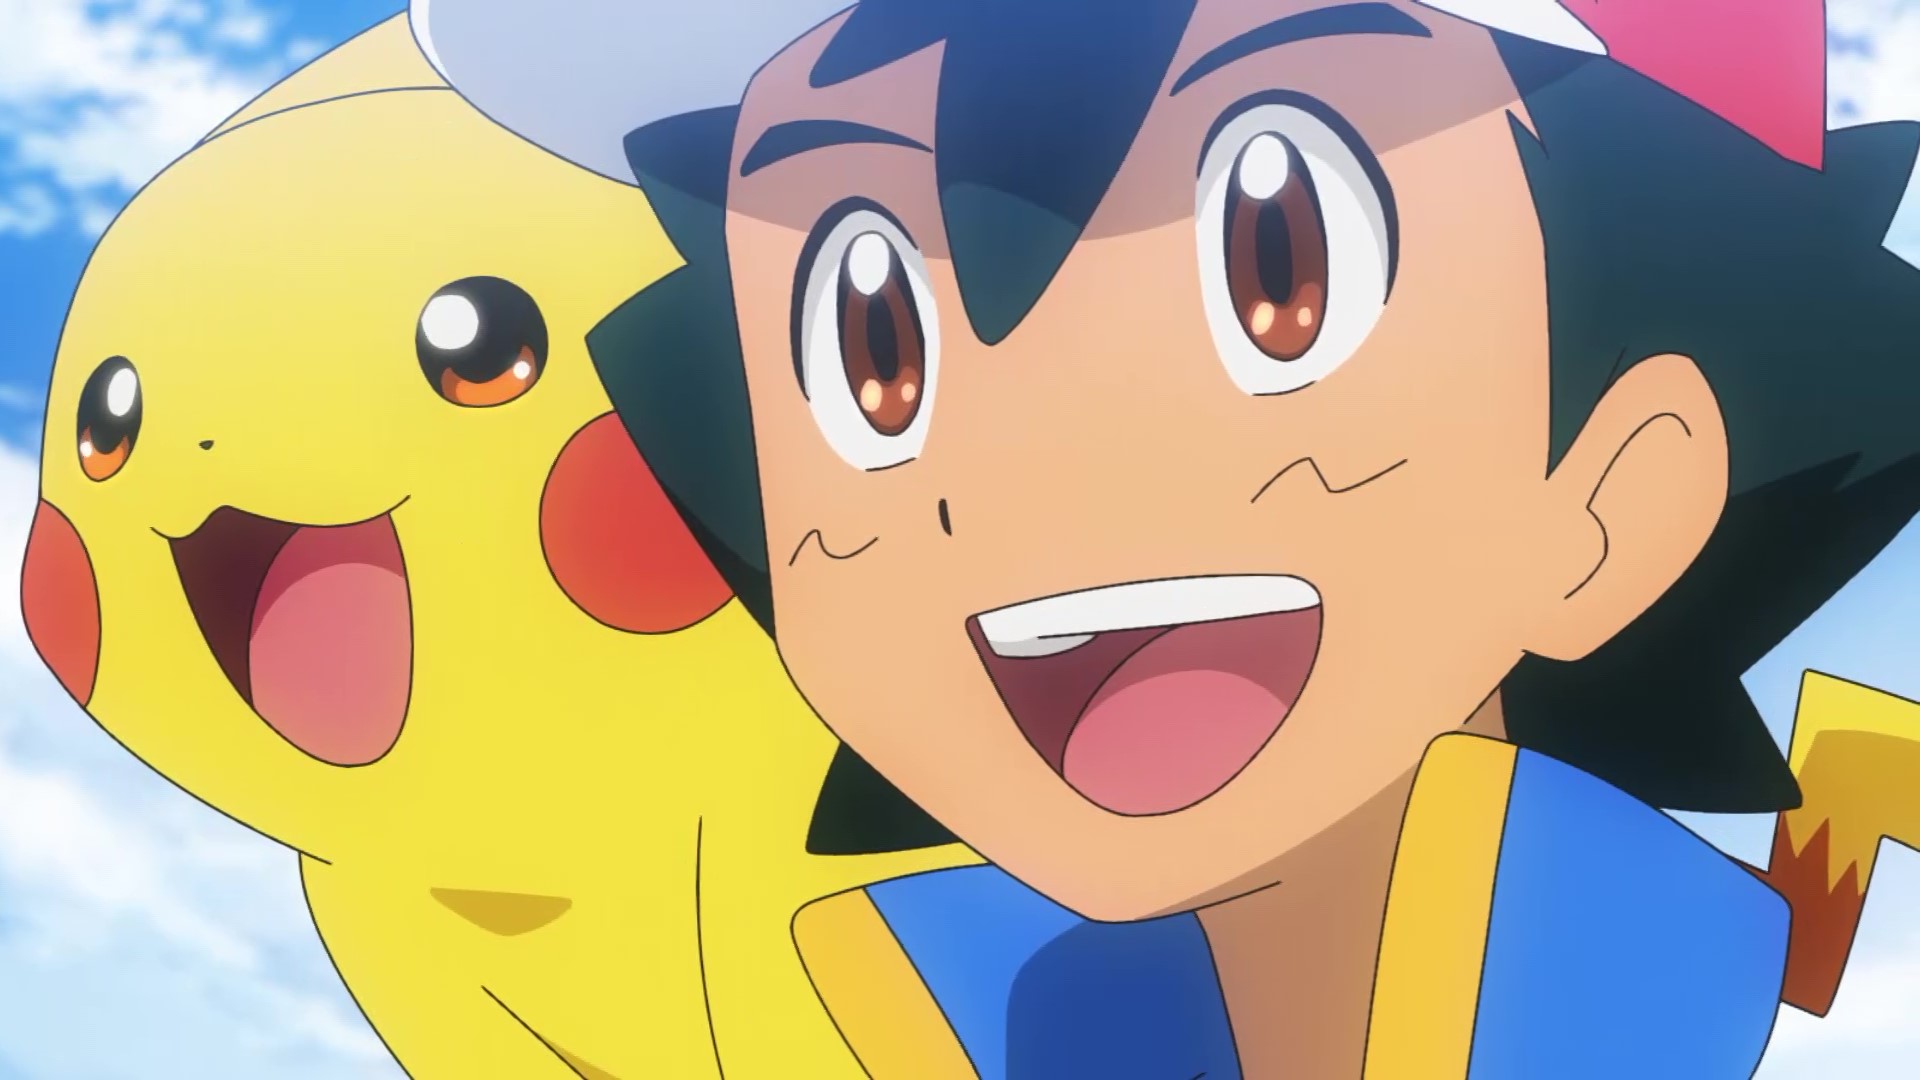 Watch the Trailer for Pokémon Horizons: The Series